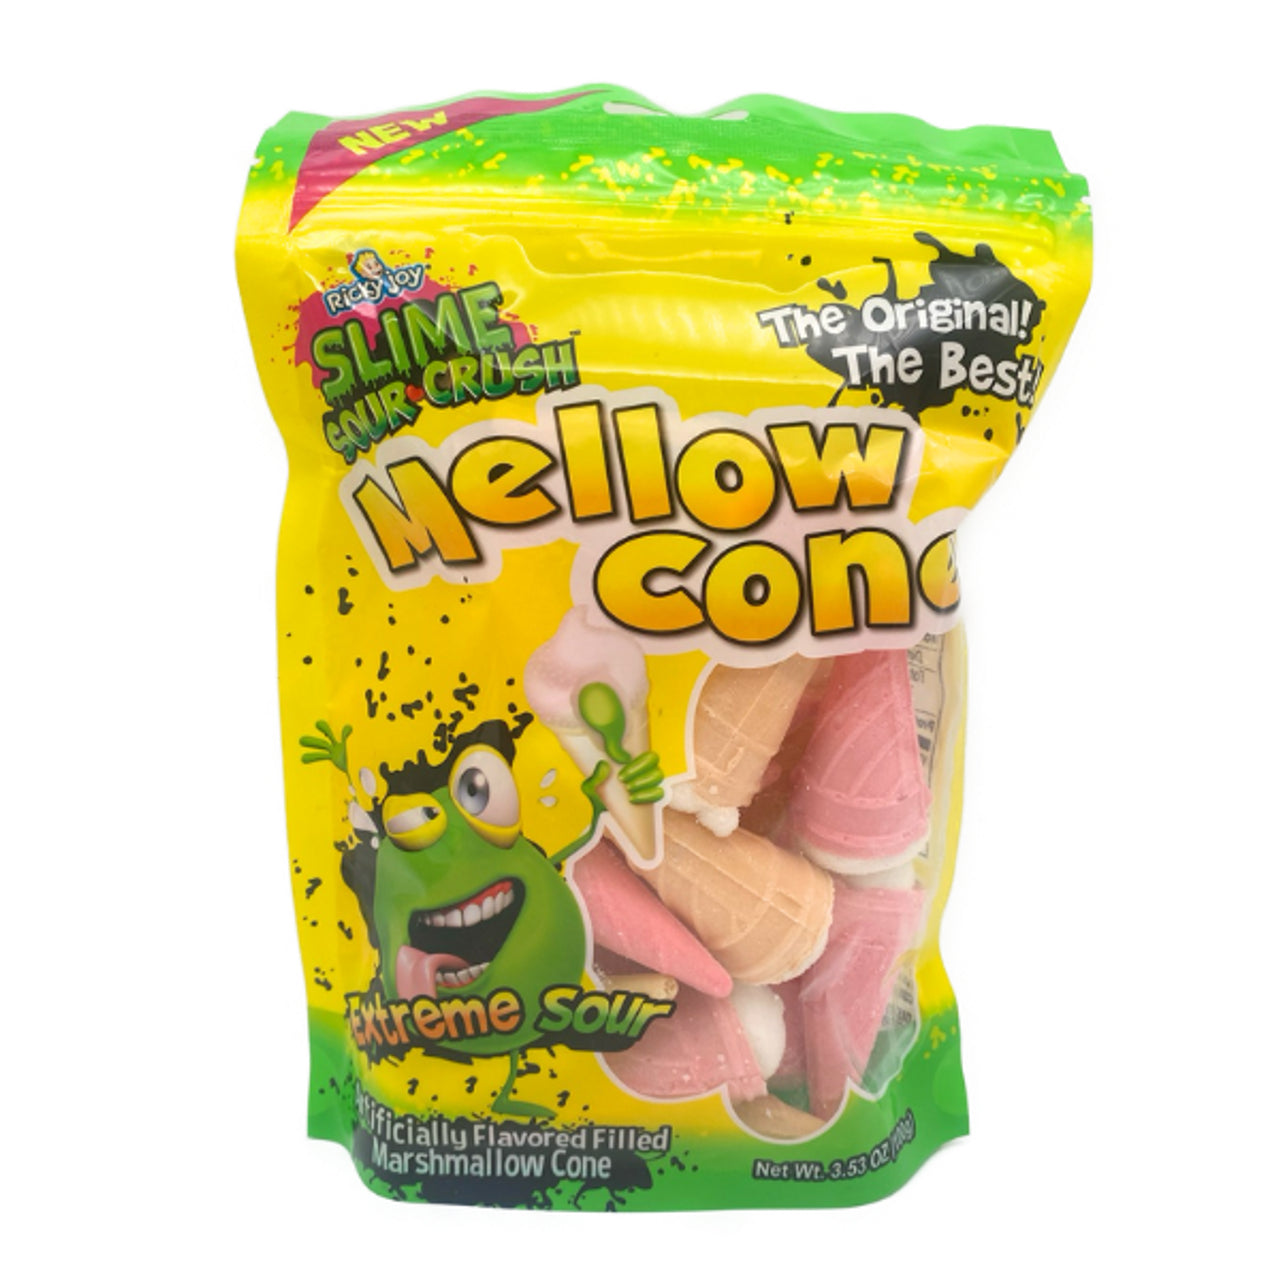 Ricky Joy Mellow Cone Extreme Sour Crush Marshmallow Cone